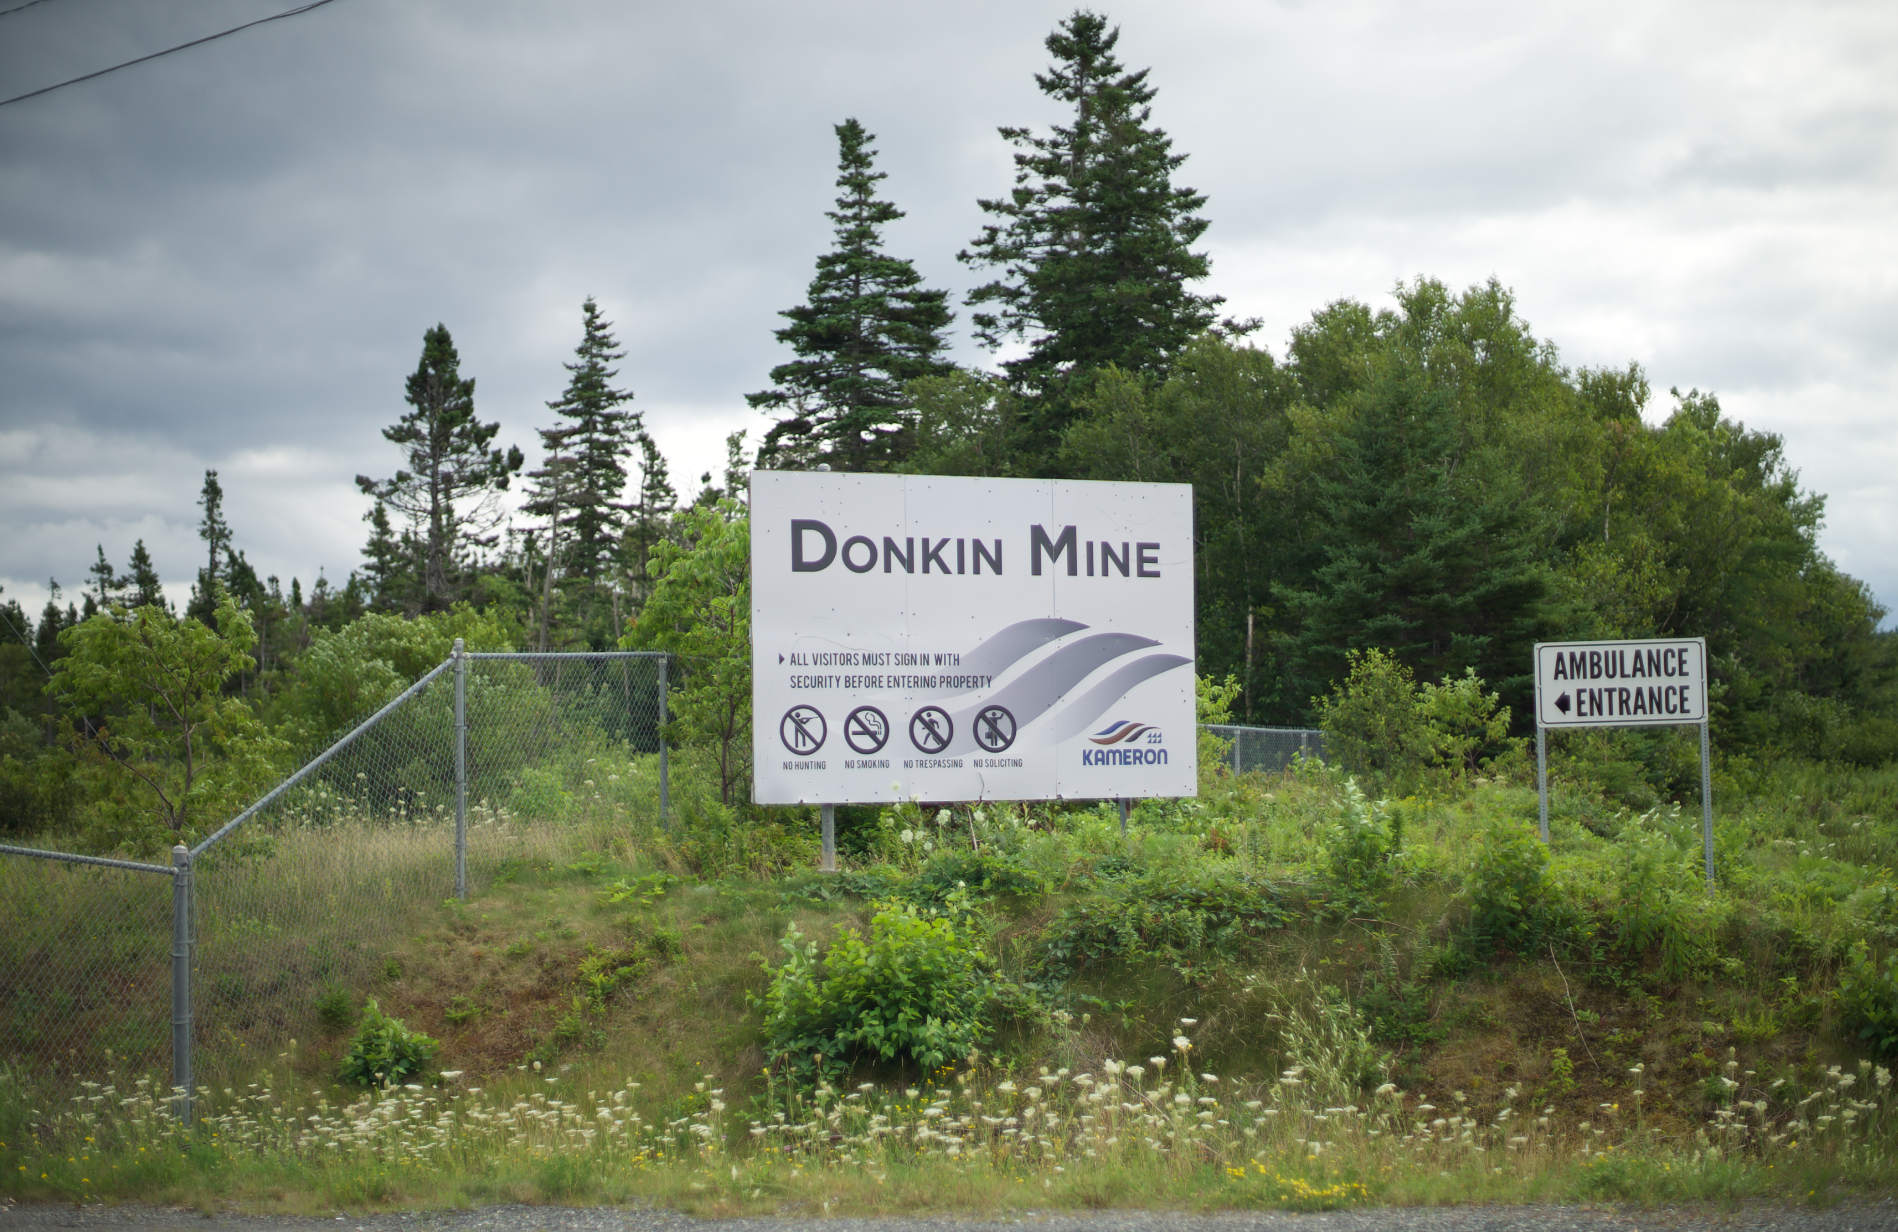 Extremely dangerous' safety violations at Canada's only underground coal  mine